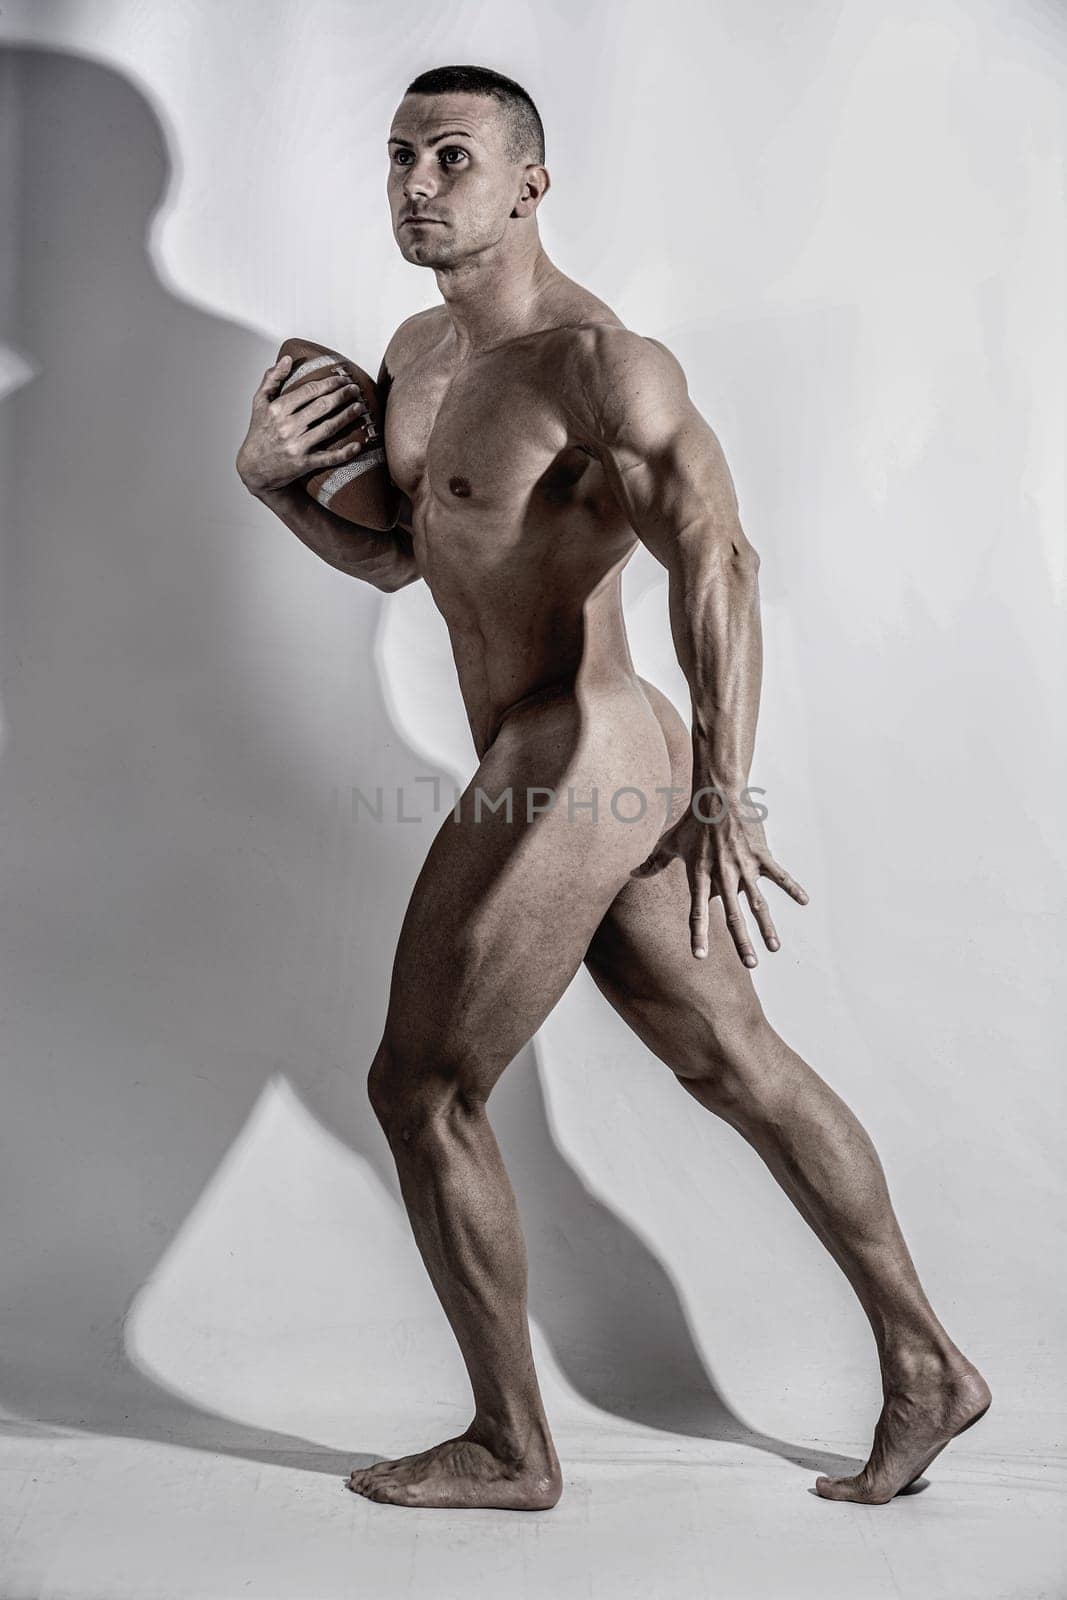 Young muscular naked man in motion of running with football looking concentrated. Full figure shot in studio